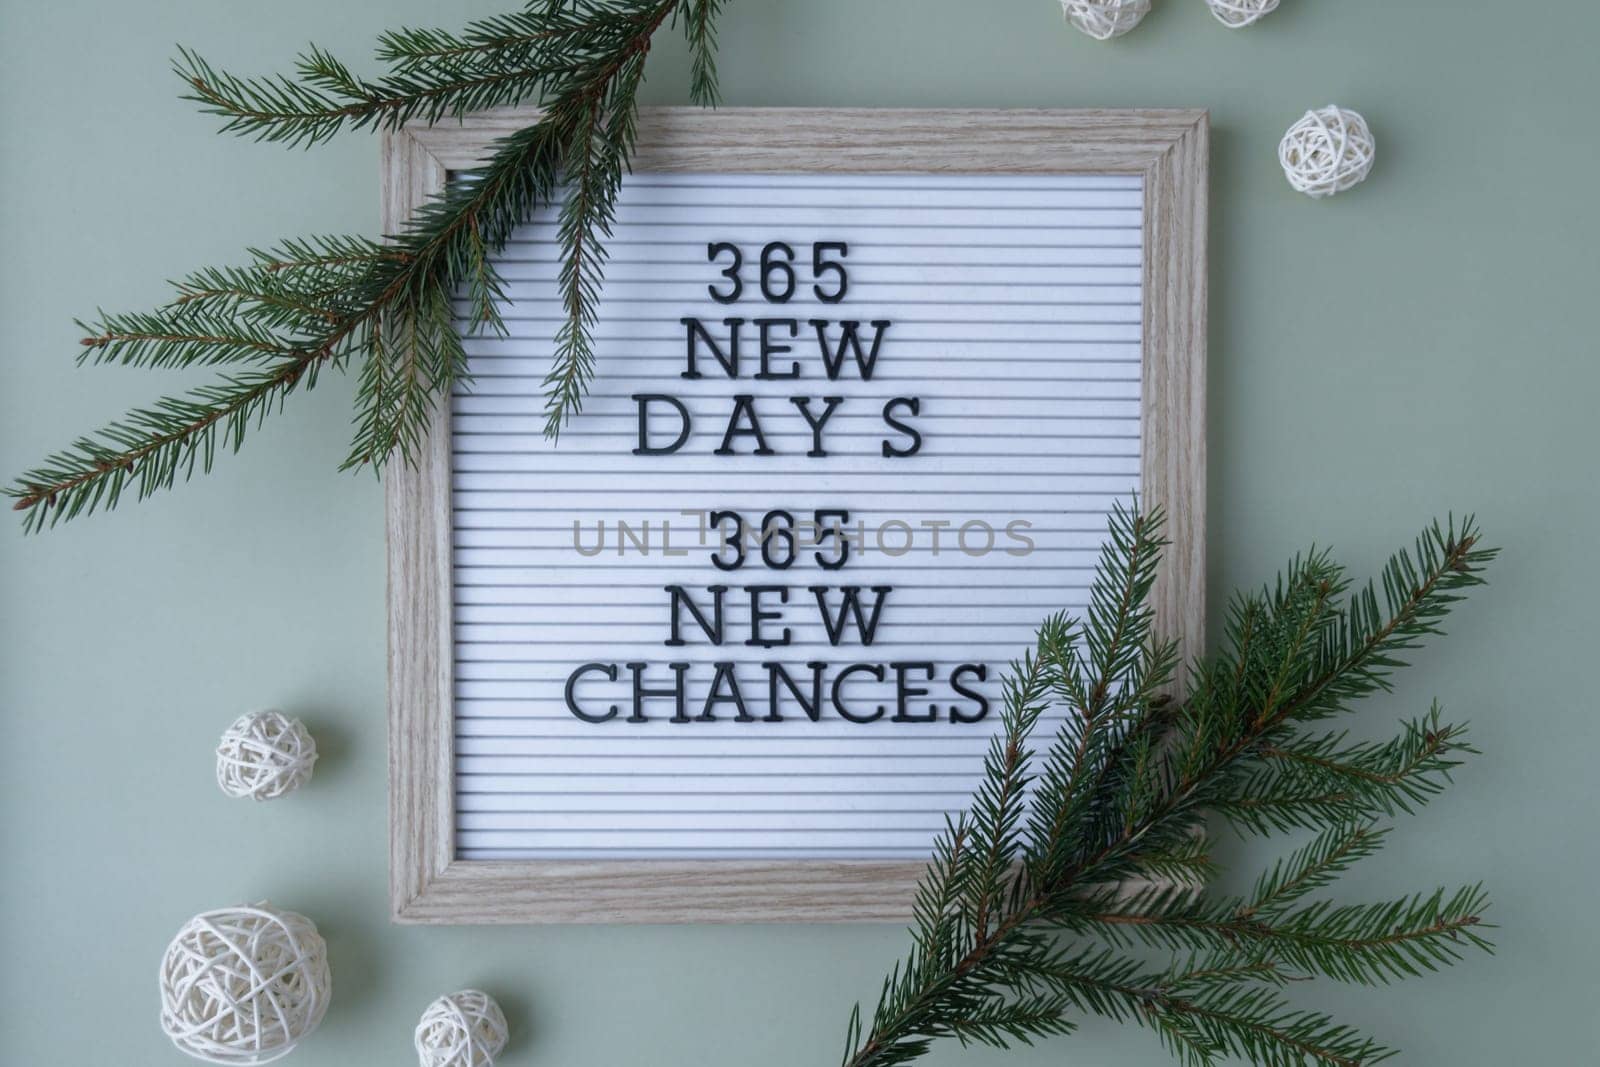 Motivational saying 365 NEW DAYS 365 NEW CHANCES. New year goals setting concept. Strategy for self development improvement. Inspirational Planning better healthier life.